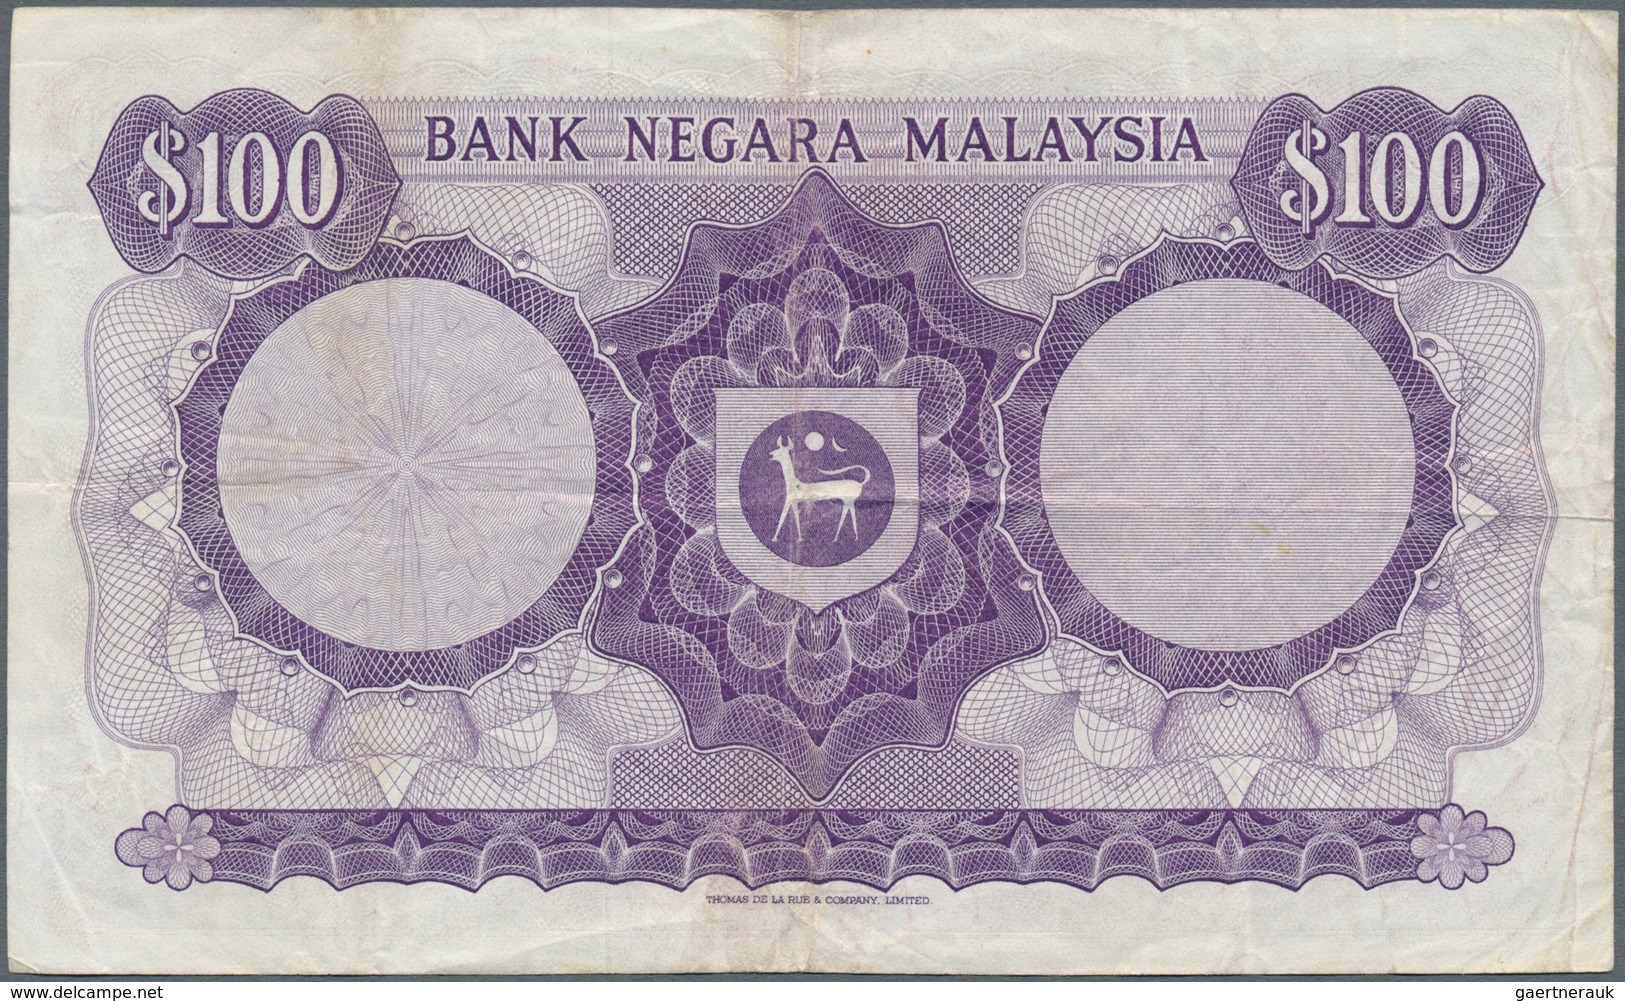 01987 Malaysia: 100 Ringgit ND P. 11 In Used Condition With Folds And Creases, Border Tear (1cm) At Upper - Malesia